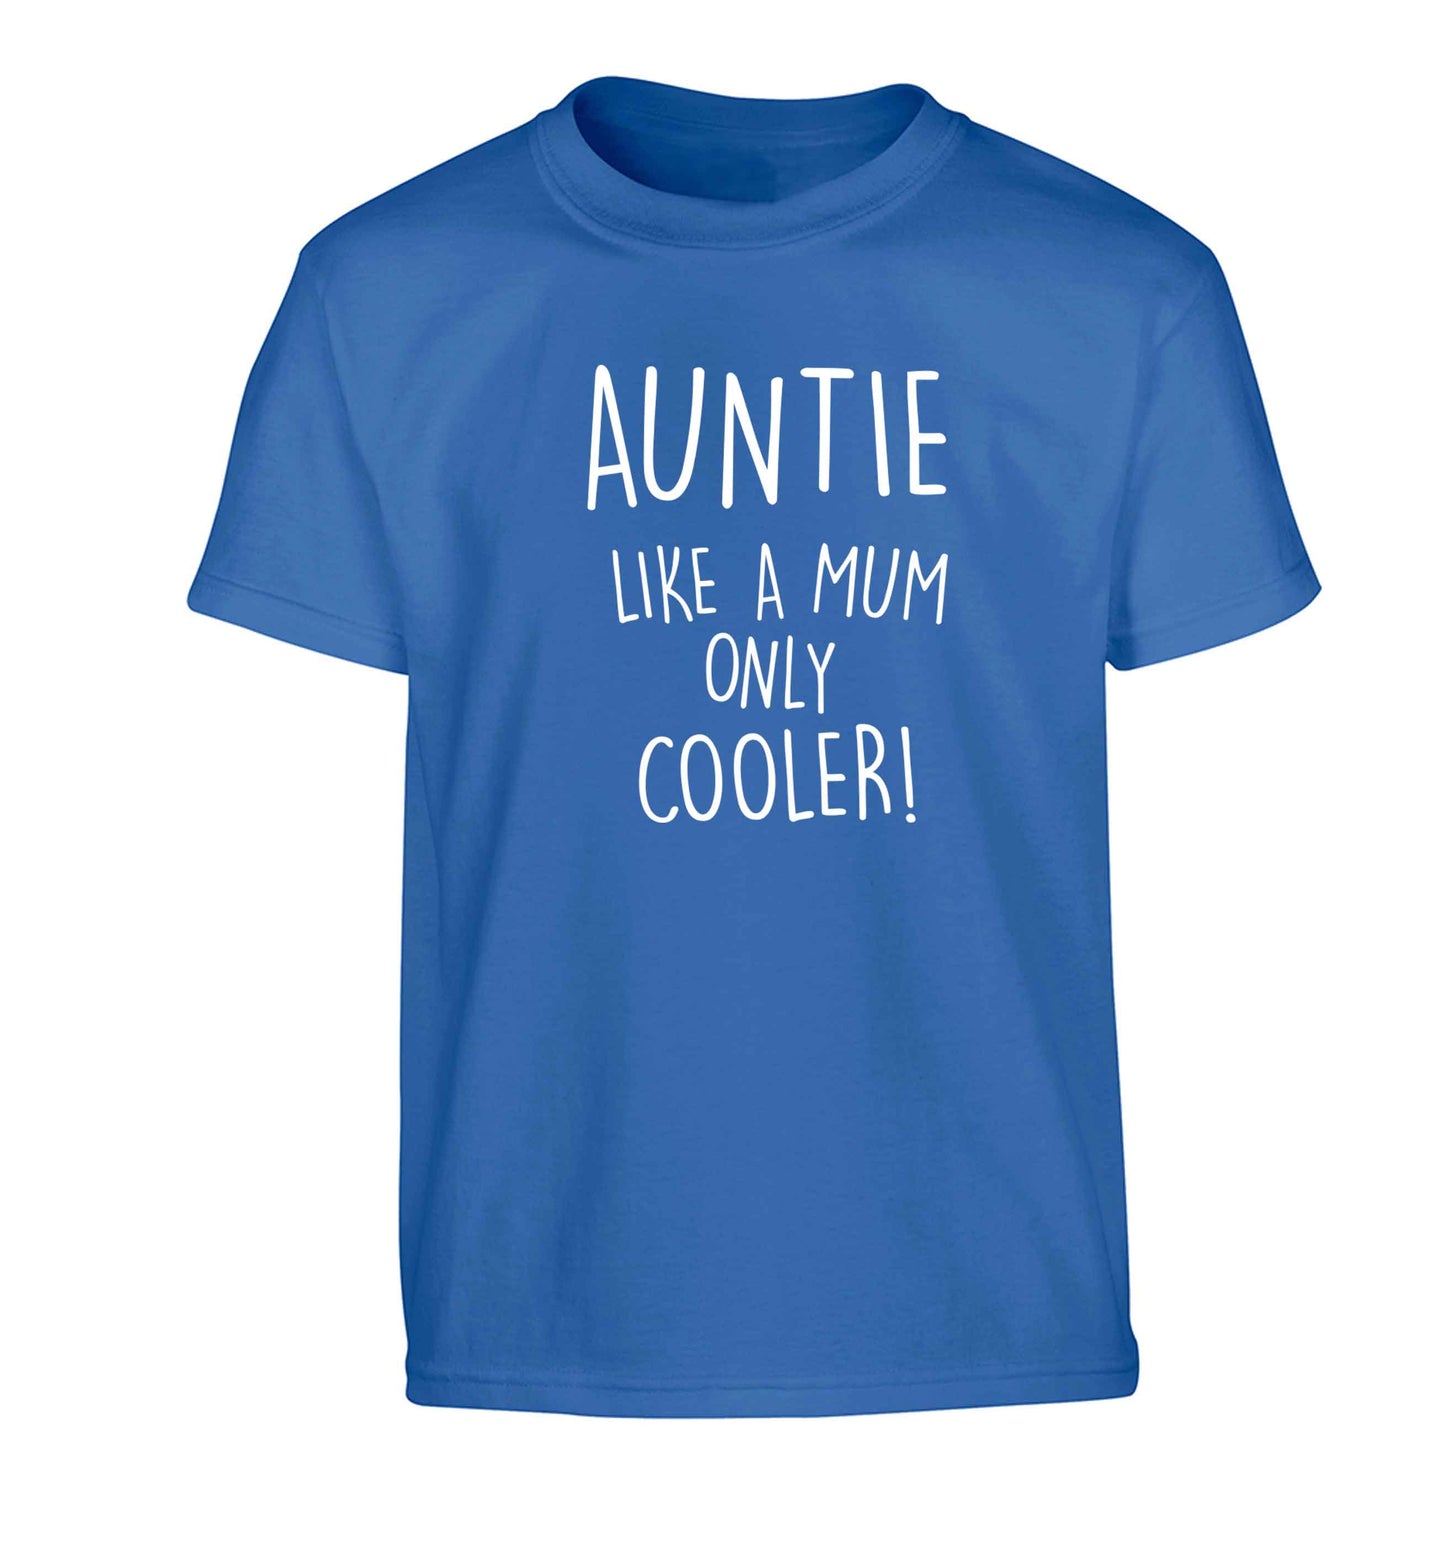 Auntie like a mum only cooler Children's blue Tshirt 12-13 Years